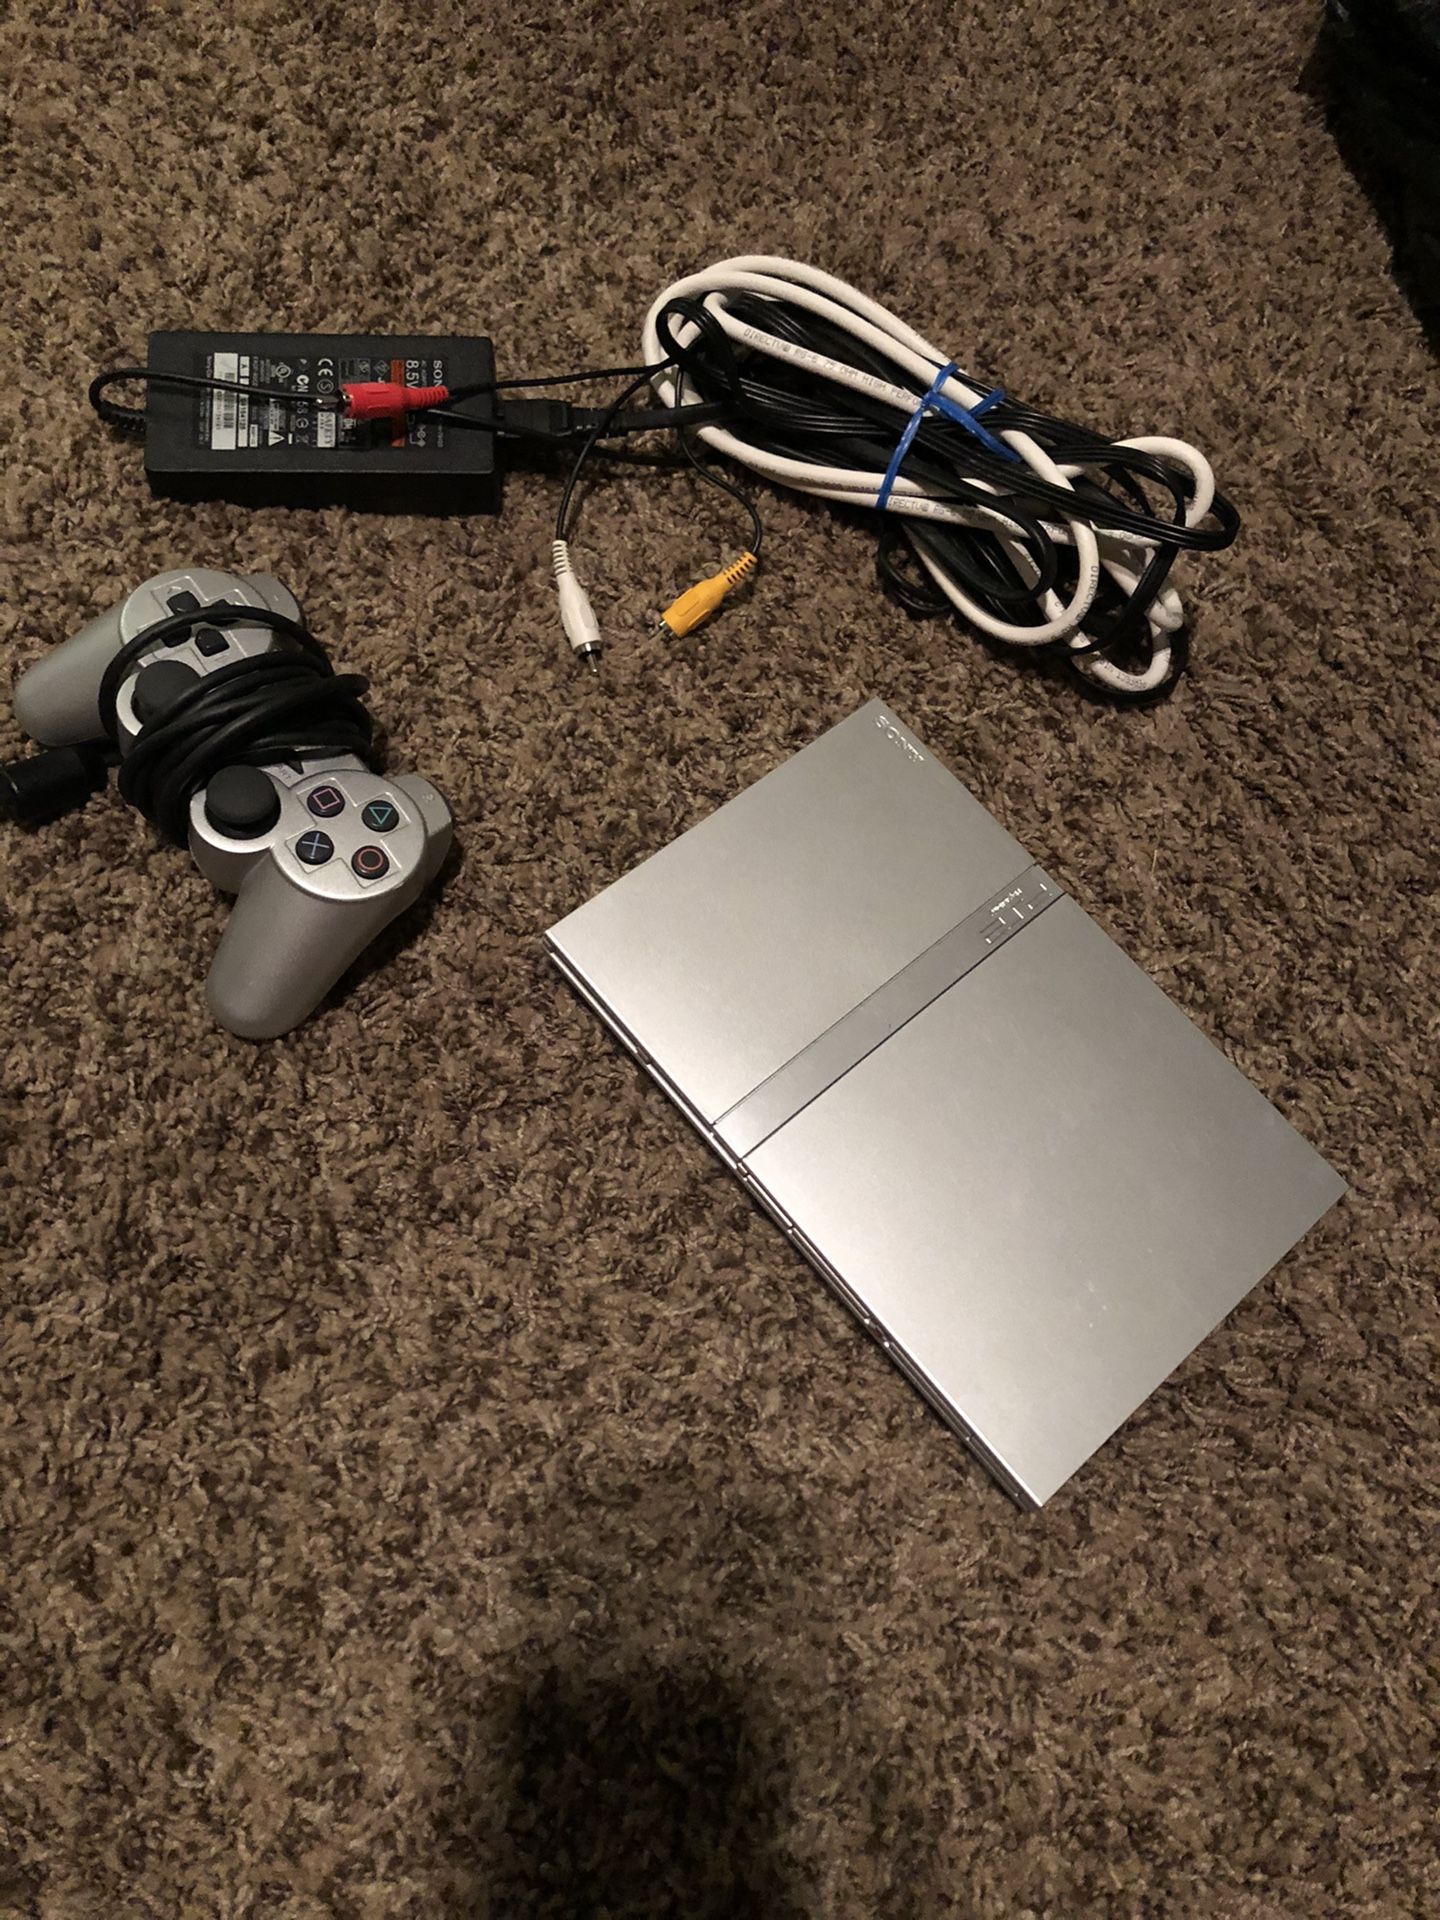 PS2 - w/ carry bag, microphone, and dance pad attachments